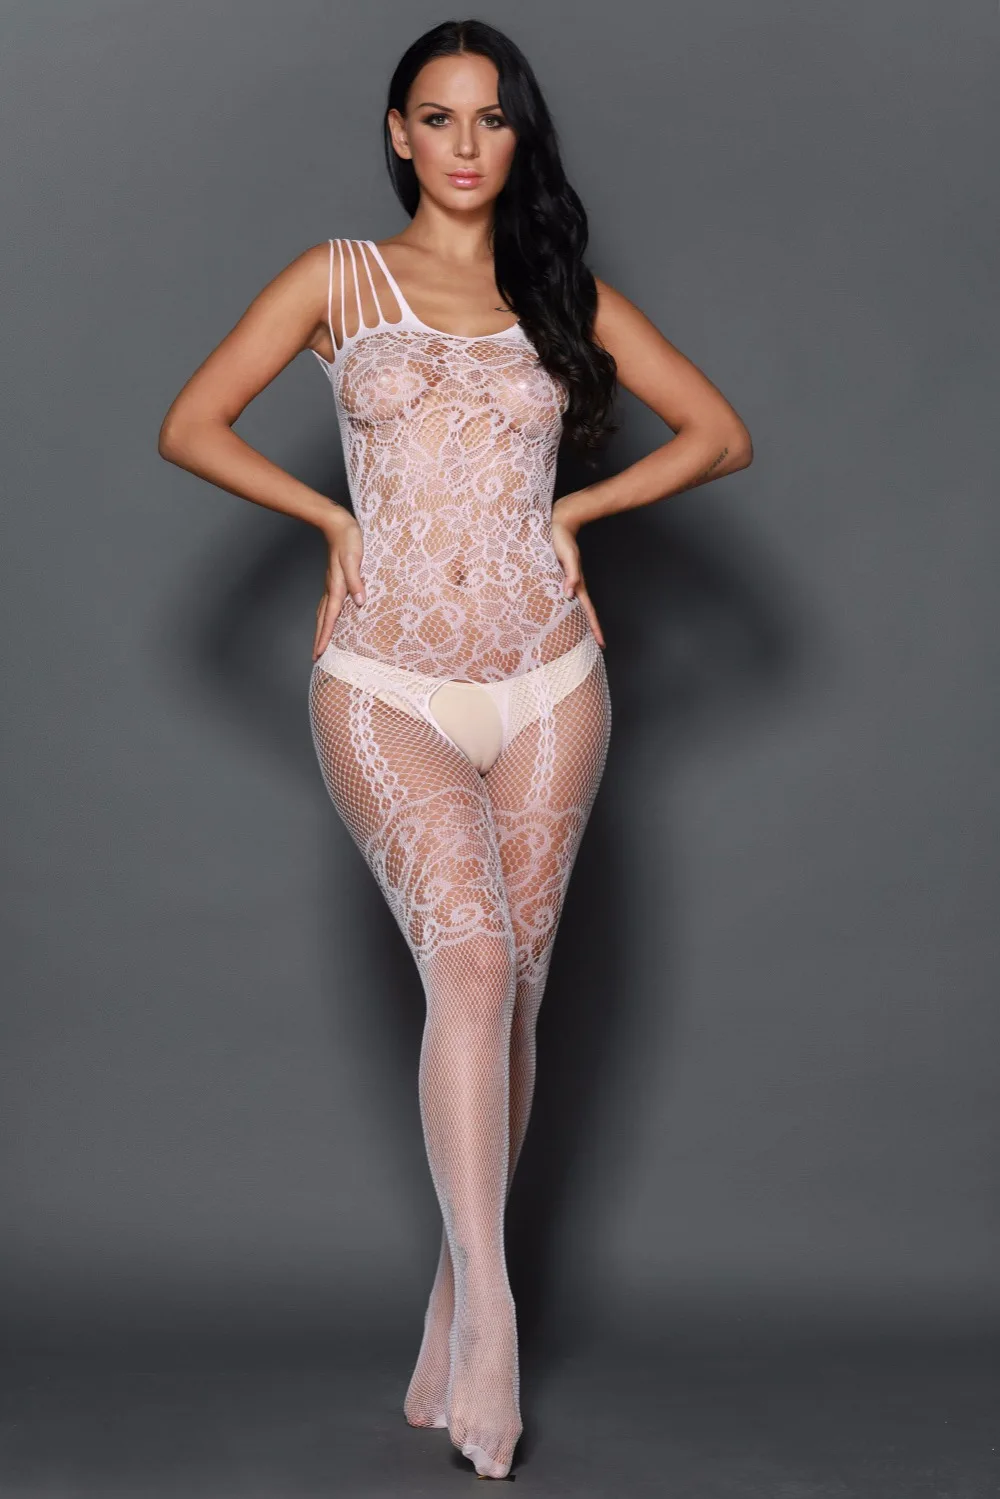 White-Strappy-Shoulders-Floral-Motif-Mesh-Body-Stockings-LC79440-1-3